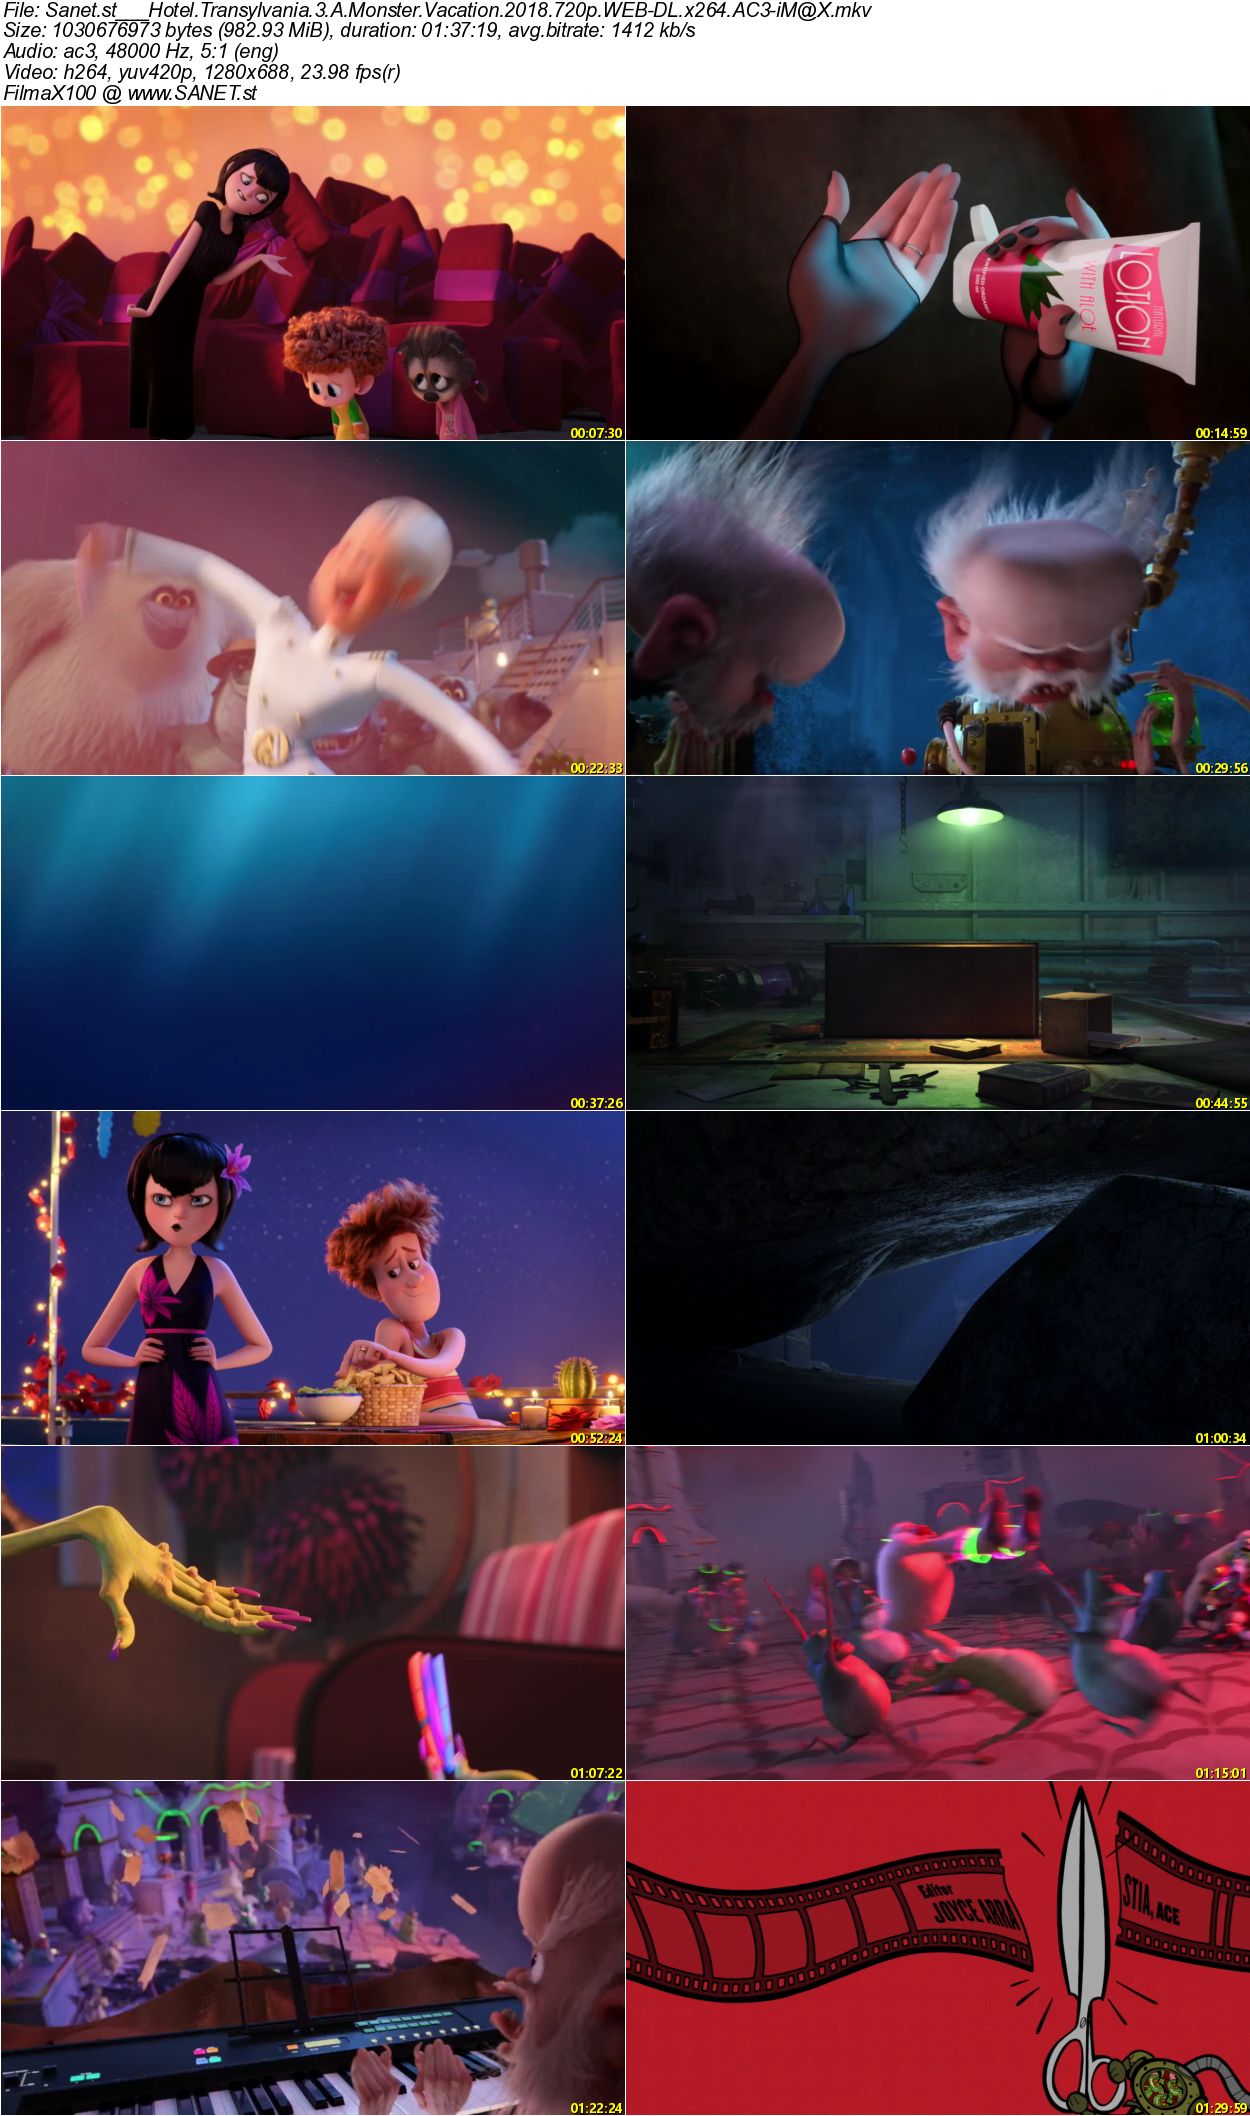 Download Hotel Transylvania 3 A Monster Vacation 2018 720p WEB-DL x264 ...